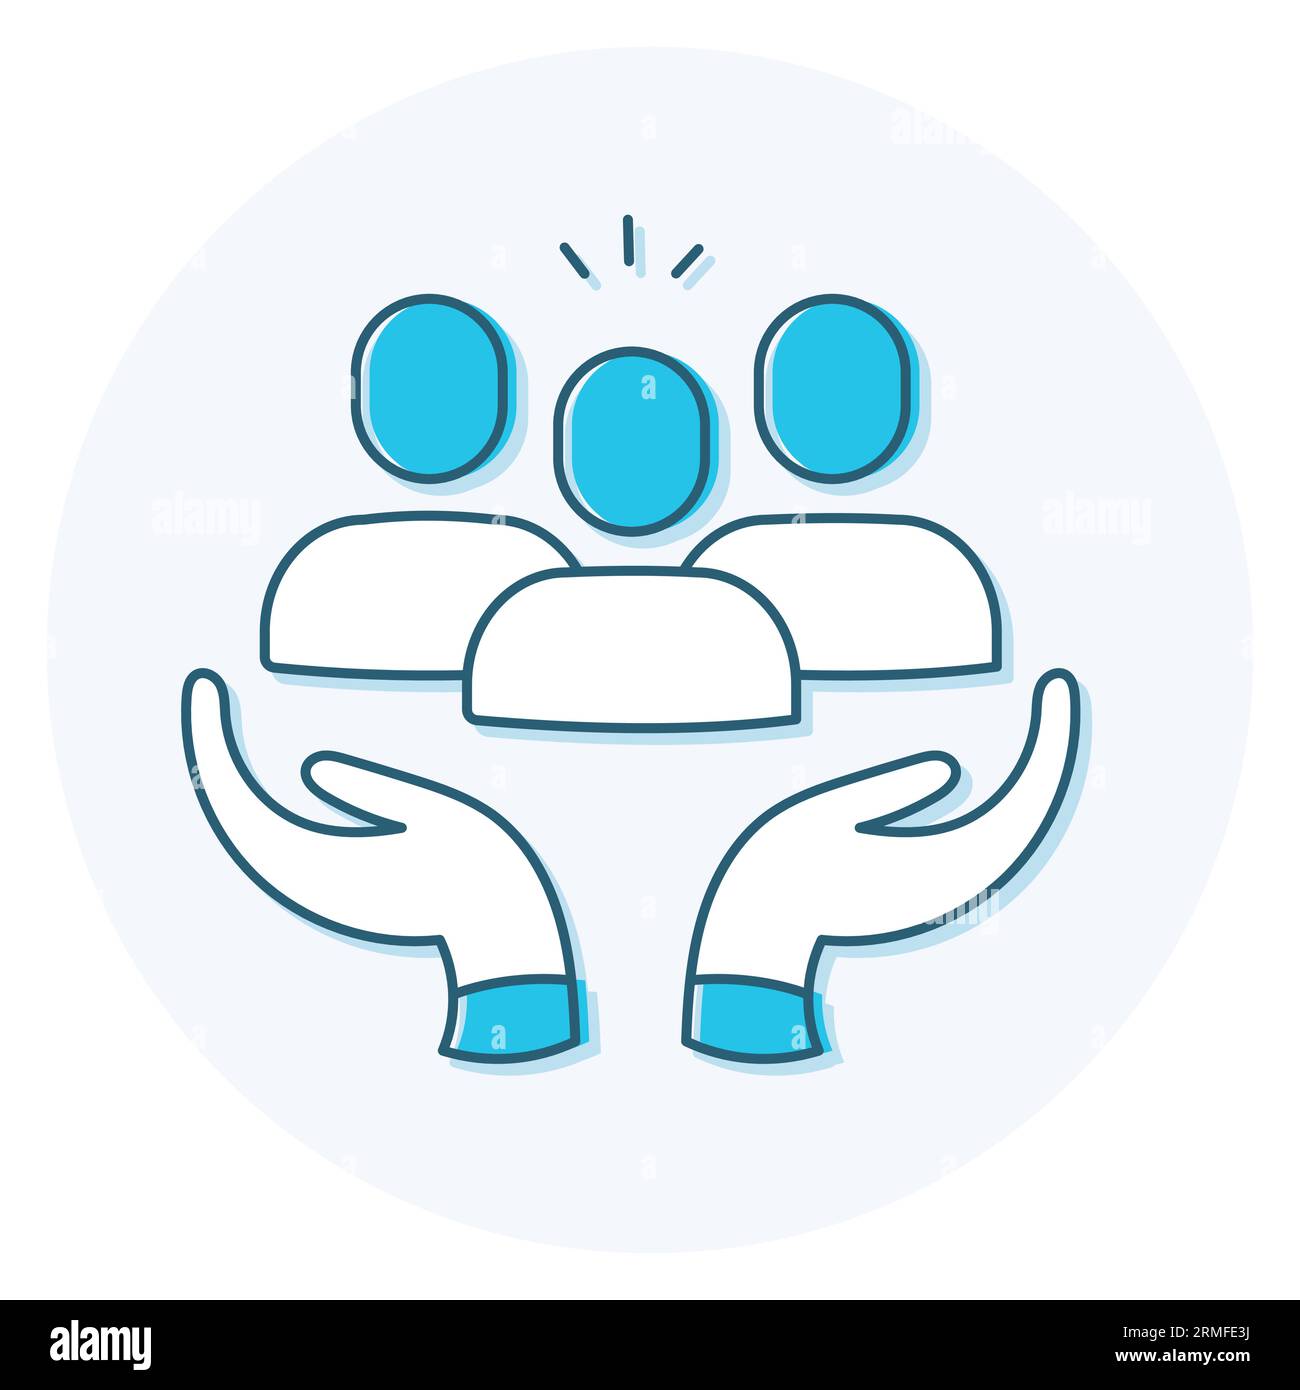 Inclusive and Diverse Community Icon - Vector Illustration for Diversity and Inclusion, Equality, Social Equity, and Employee Support. Stock Vector